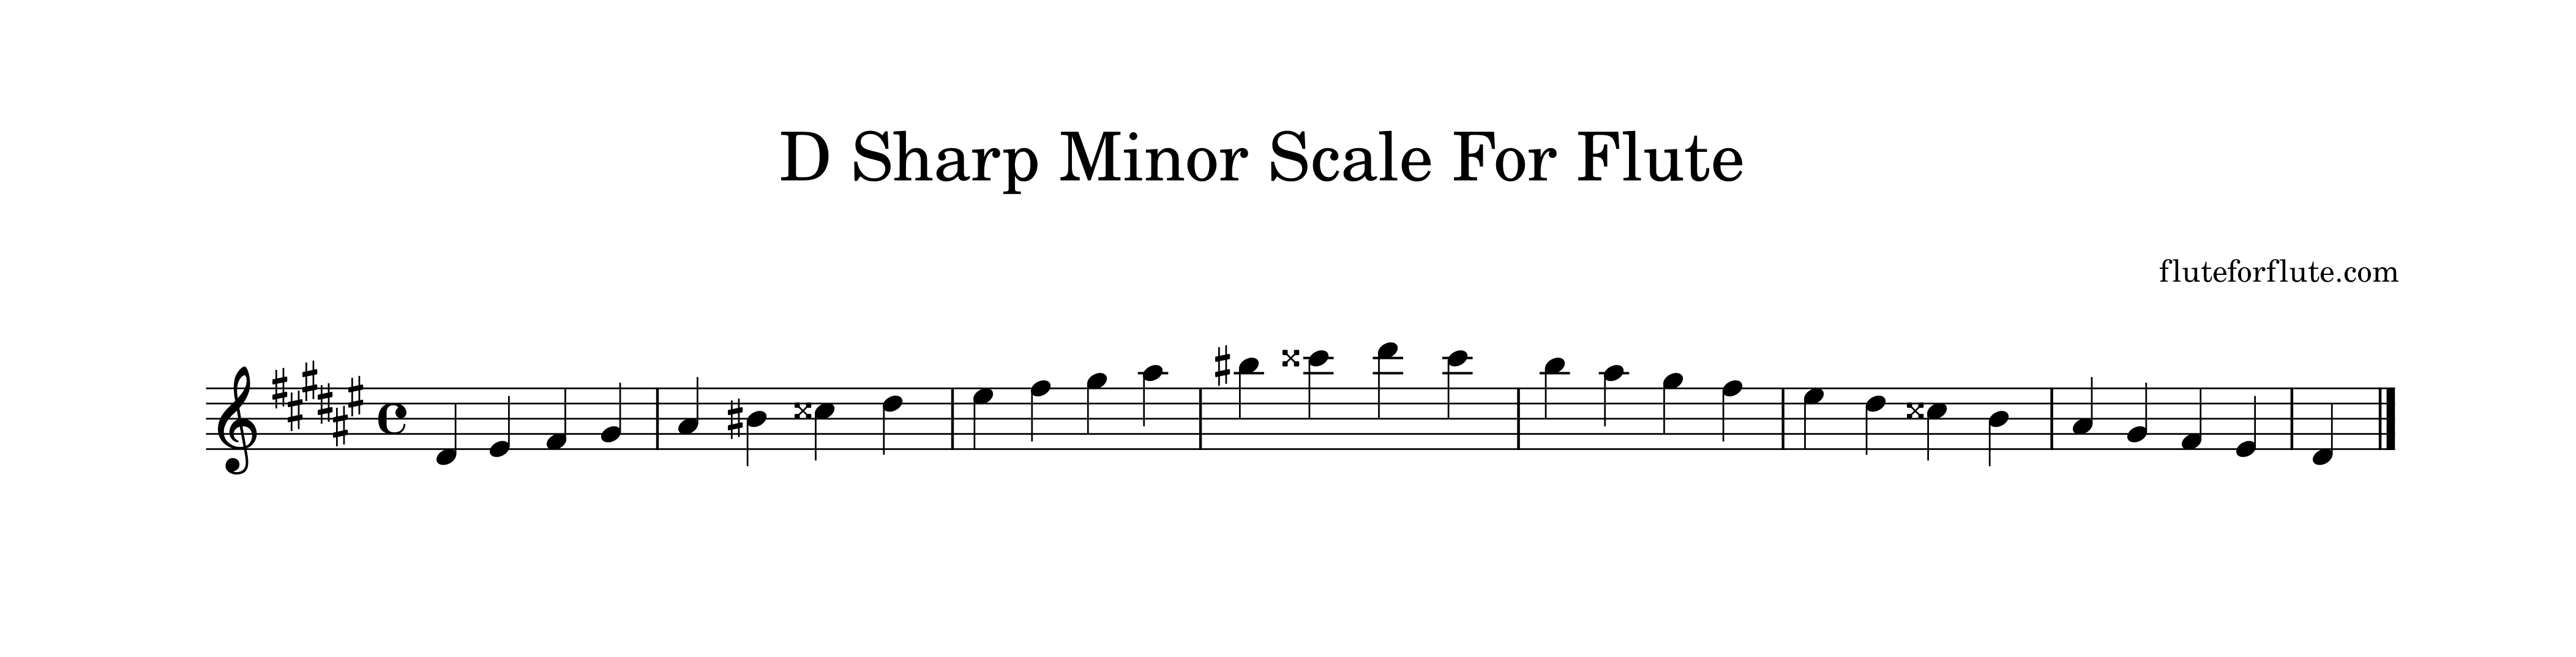 D sharp minor scale for flute